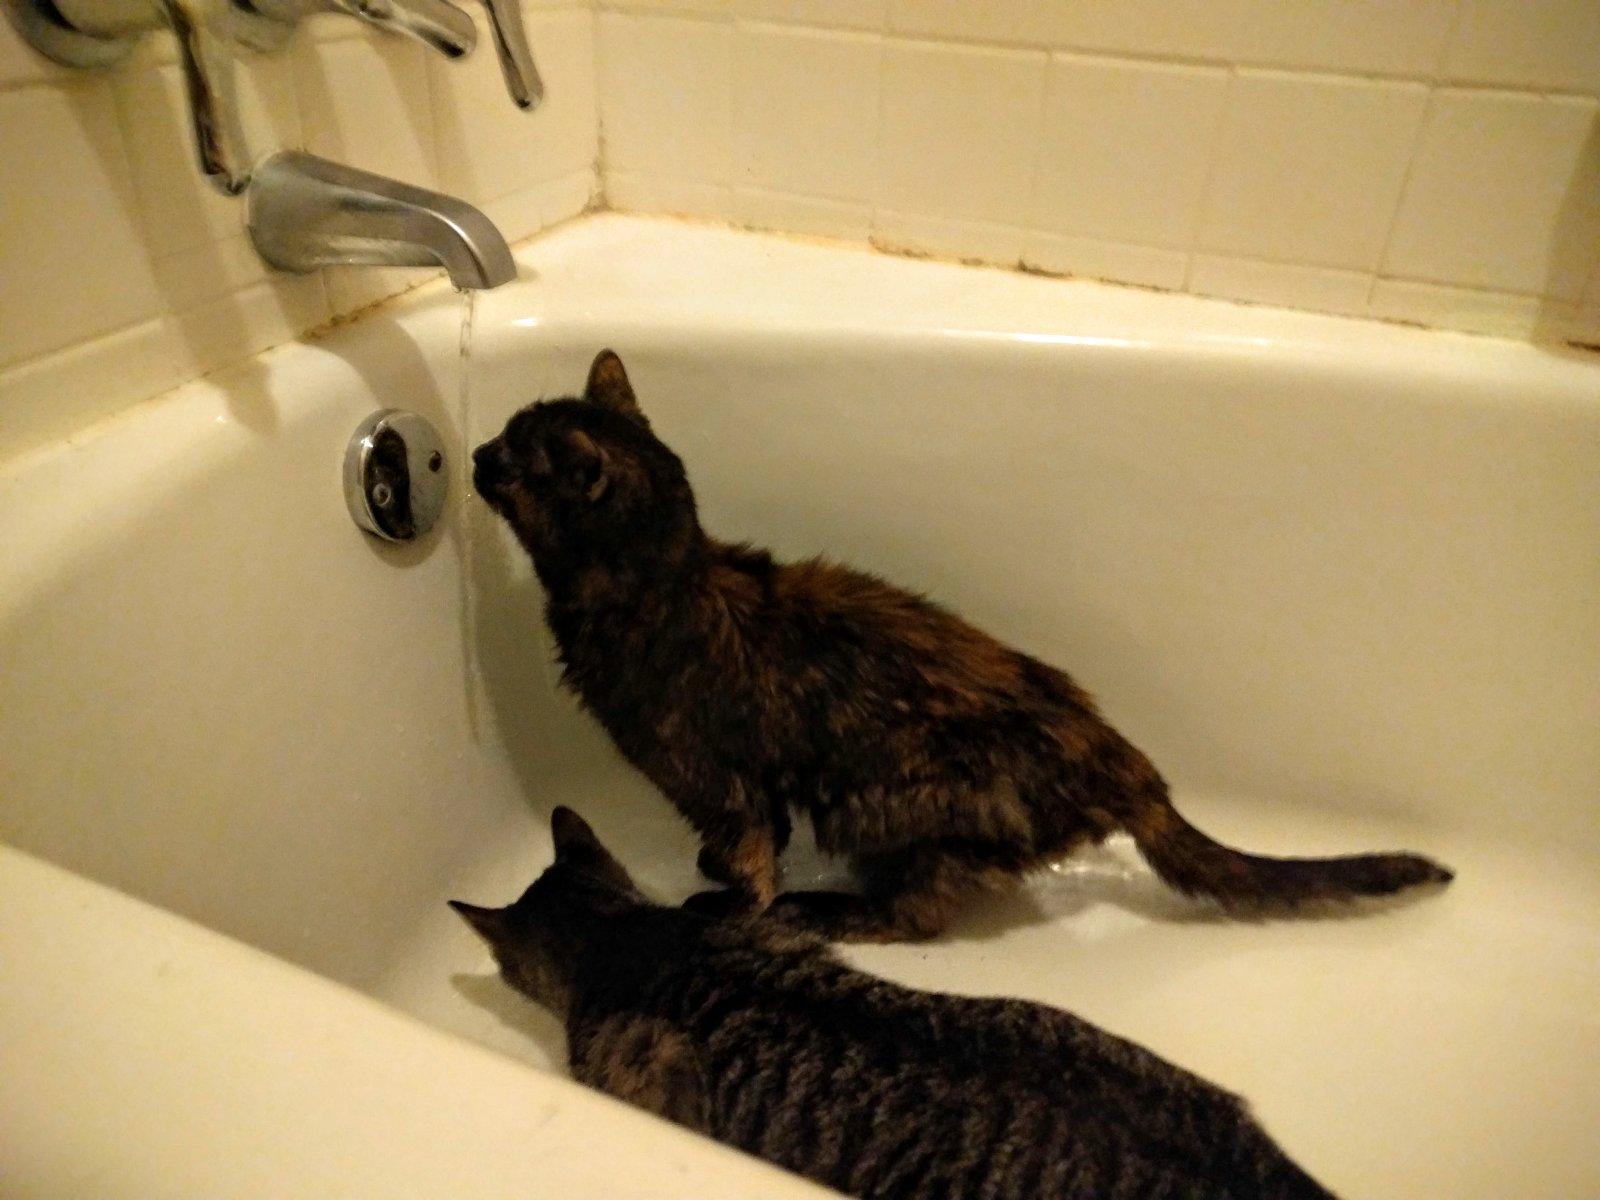 She loved running water and would stare pointedly at faucets until she got some